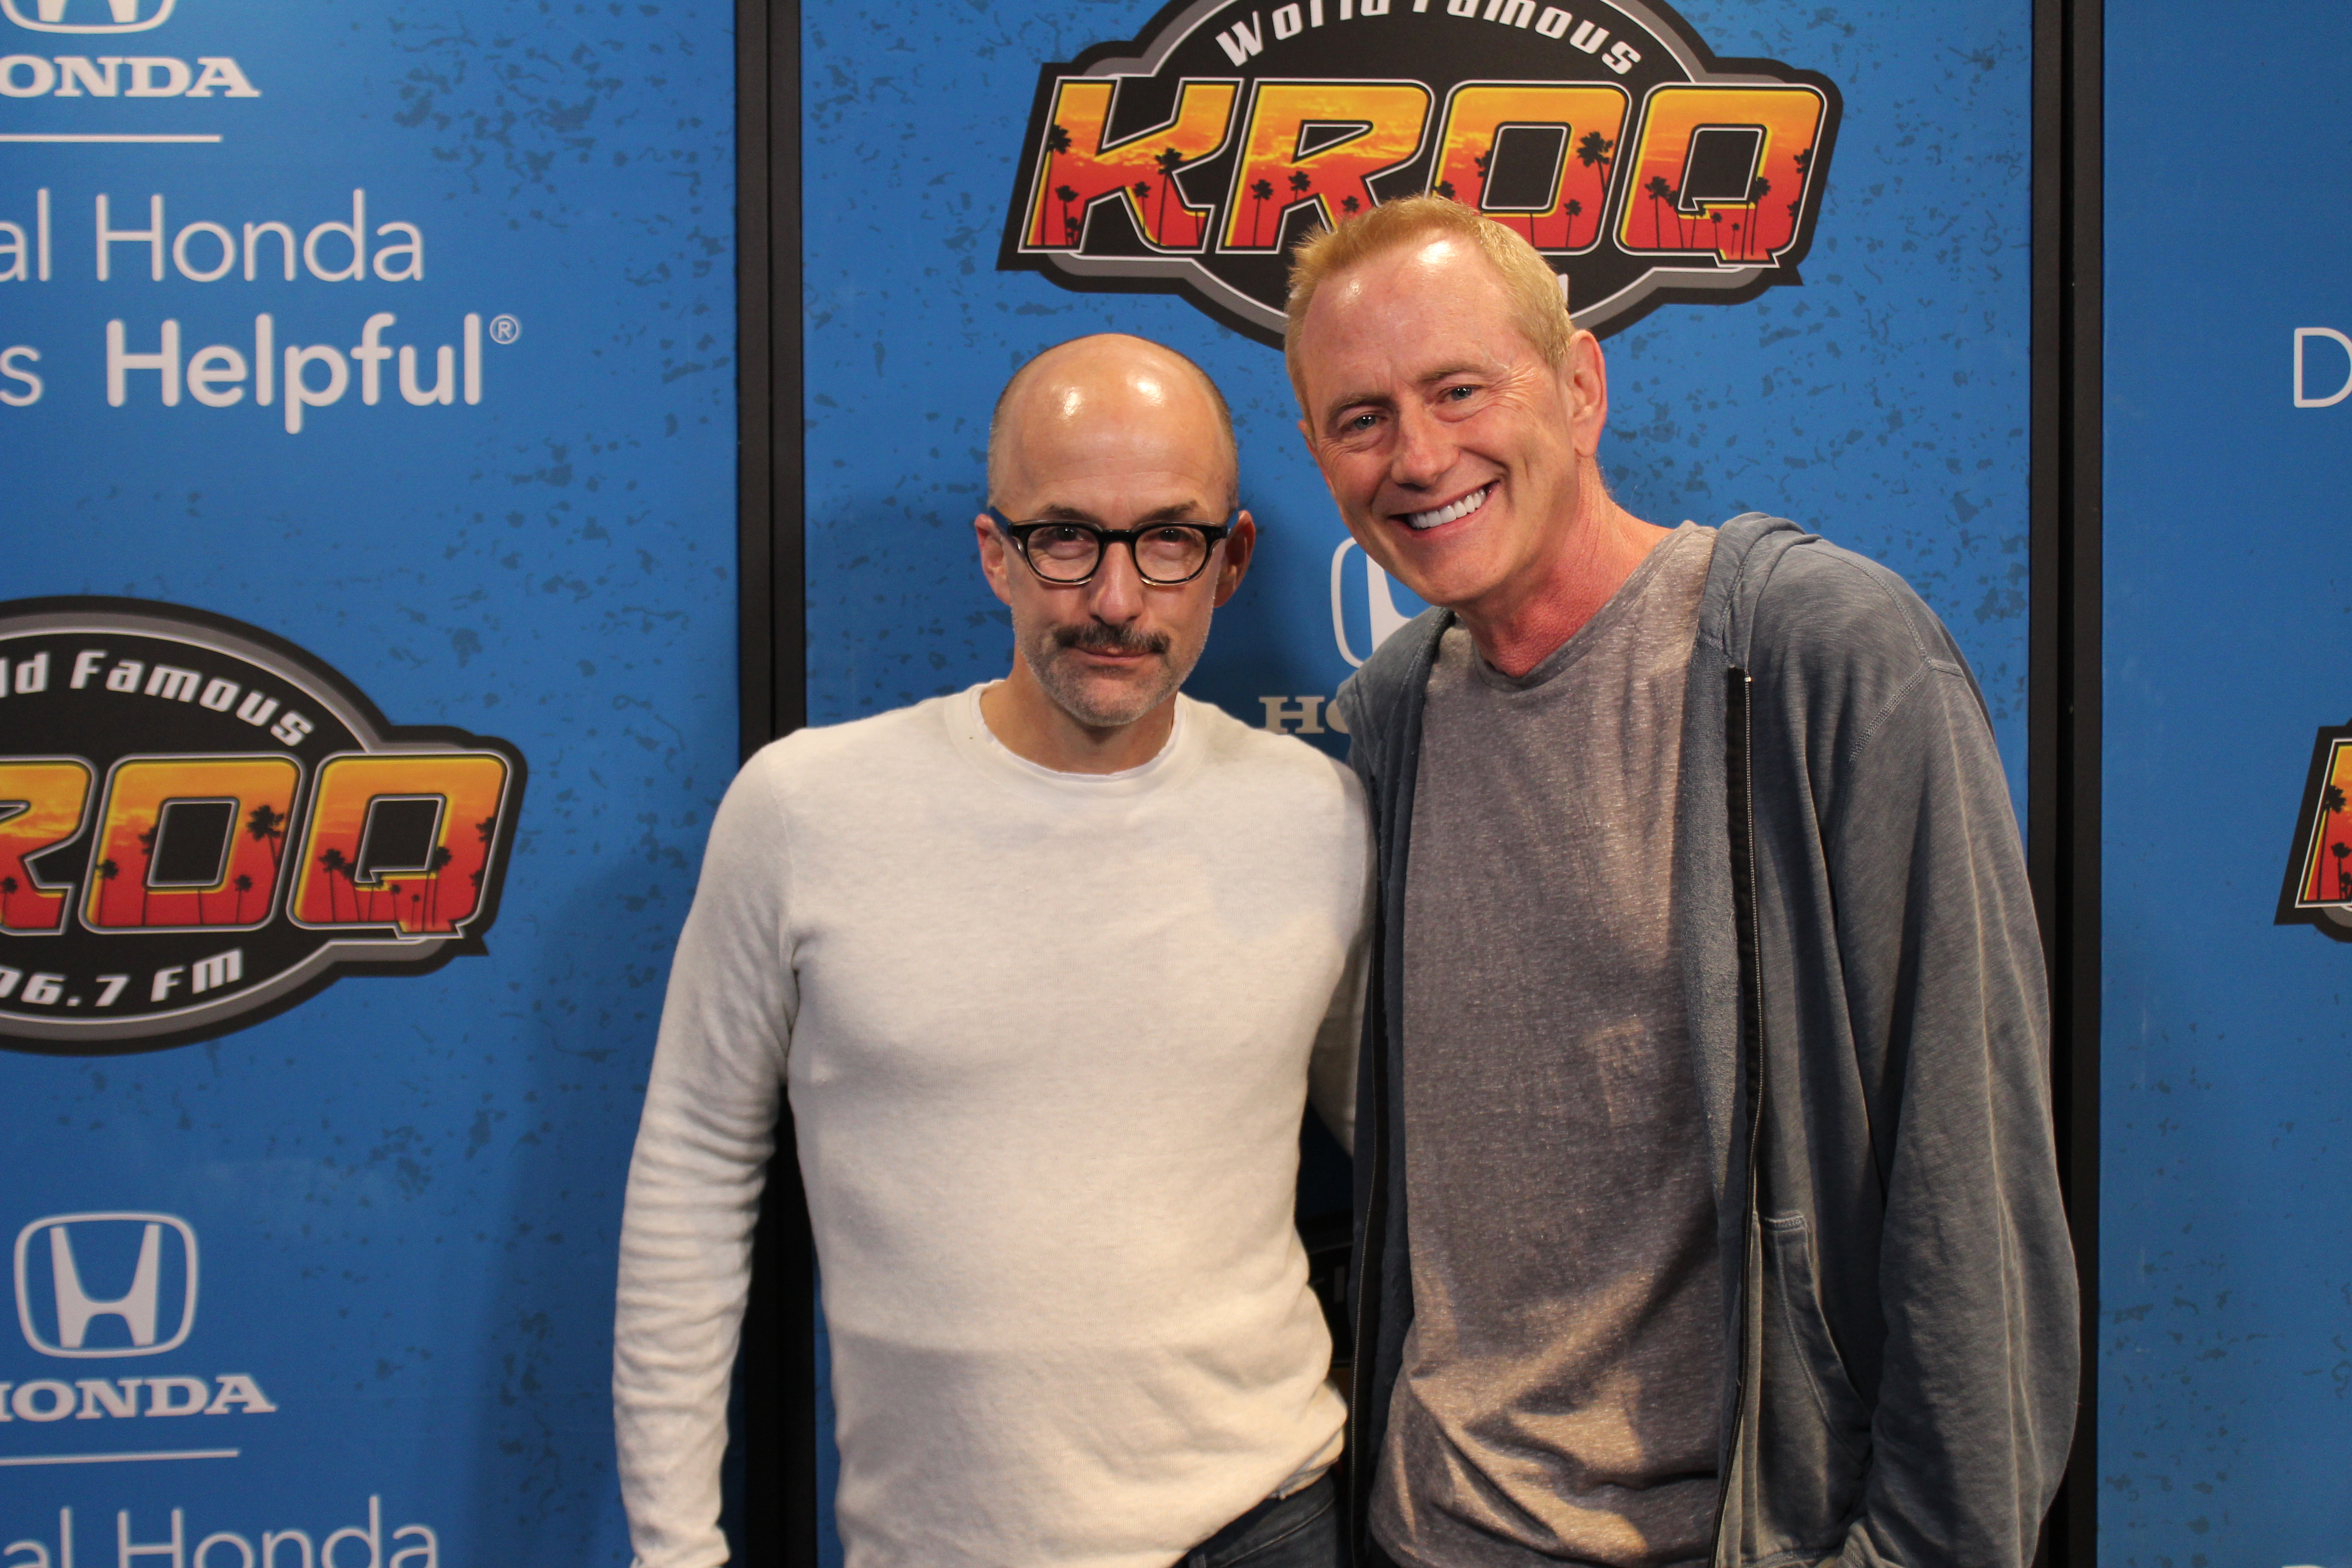 Thursday, June 7th with guests: Jim Rash and Dr. Drew